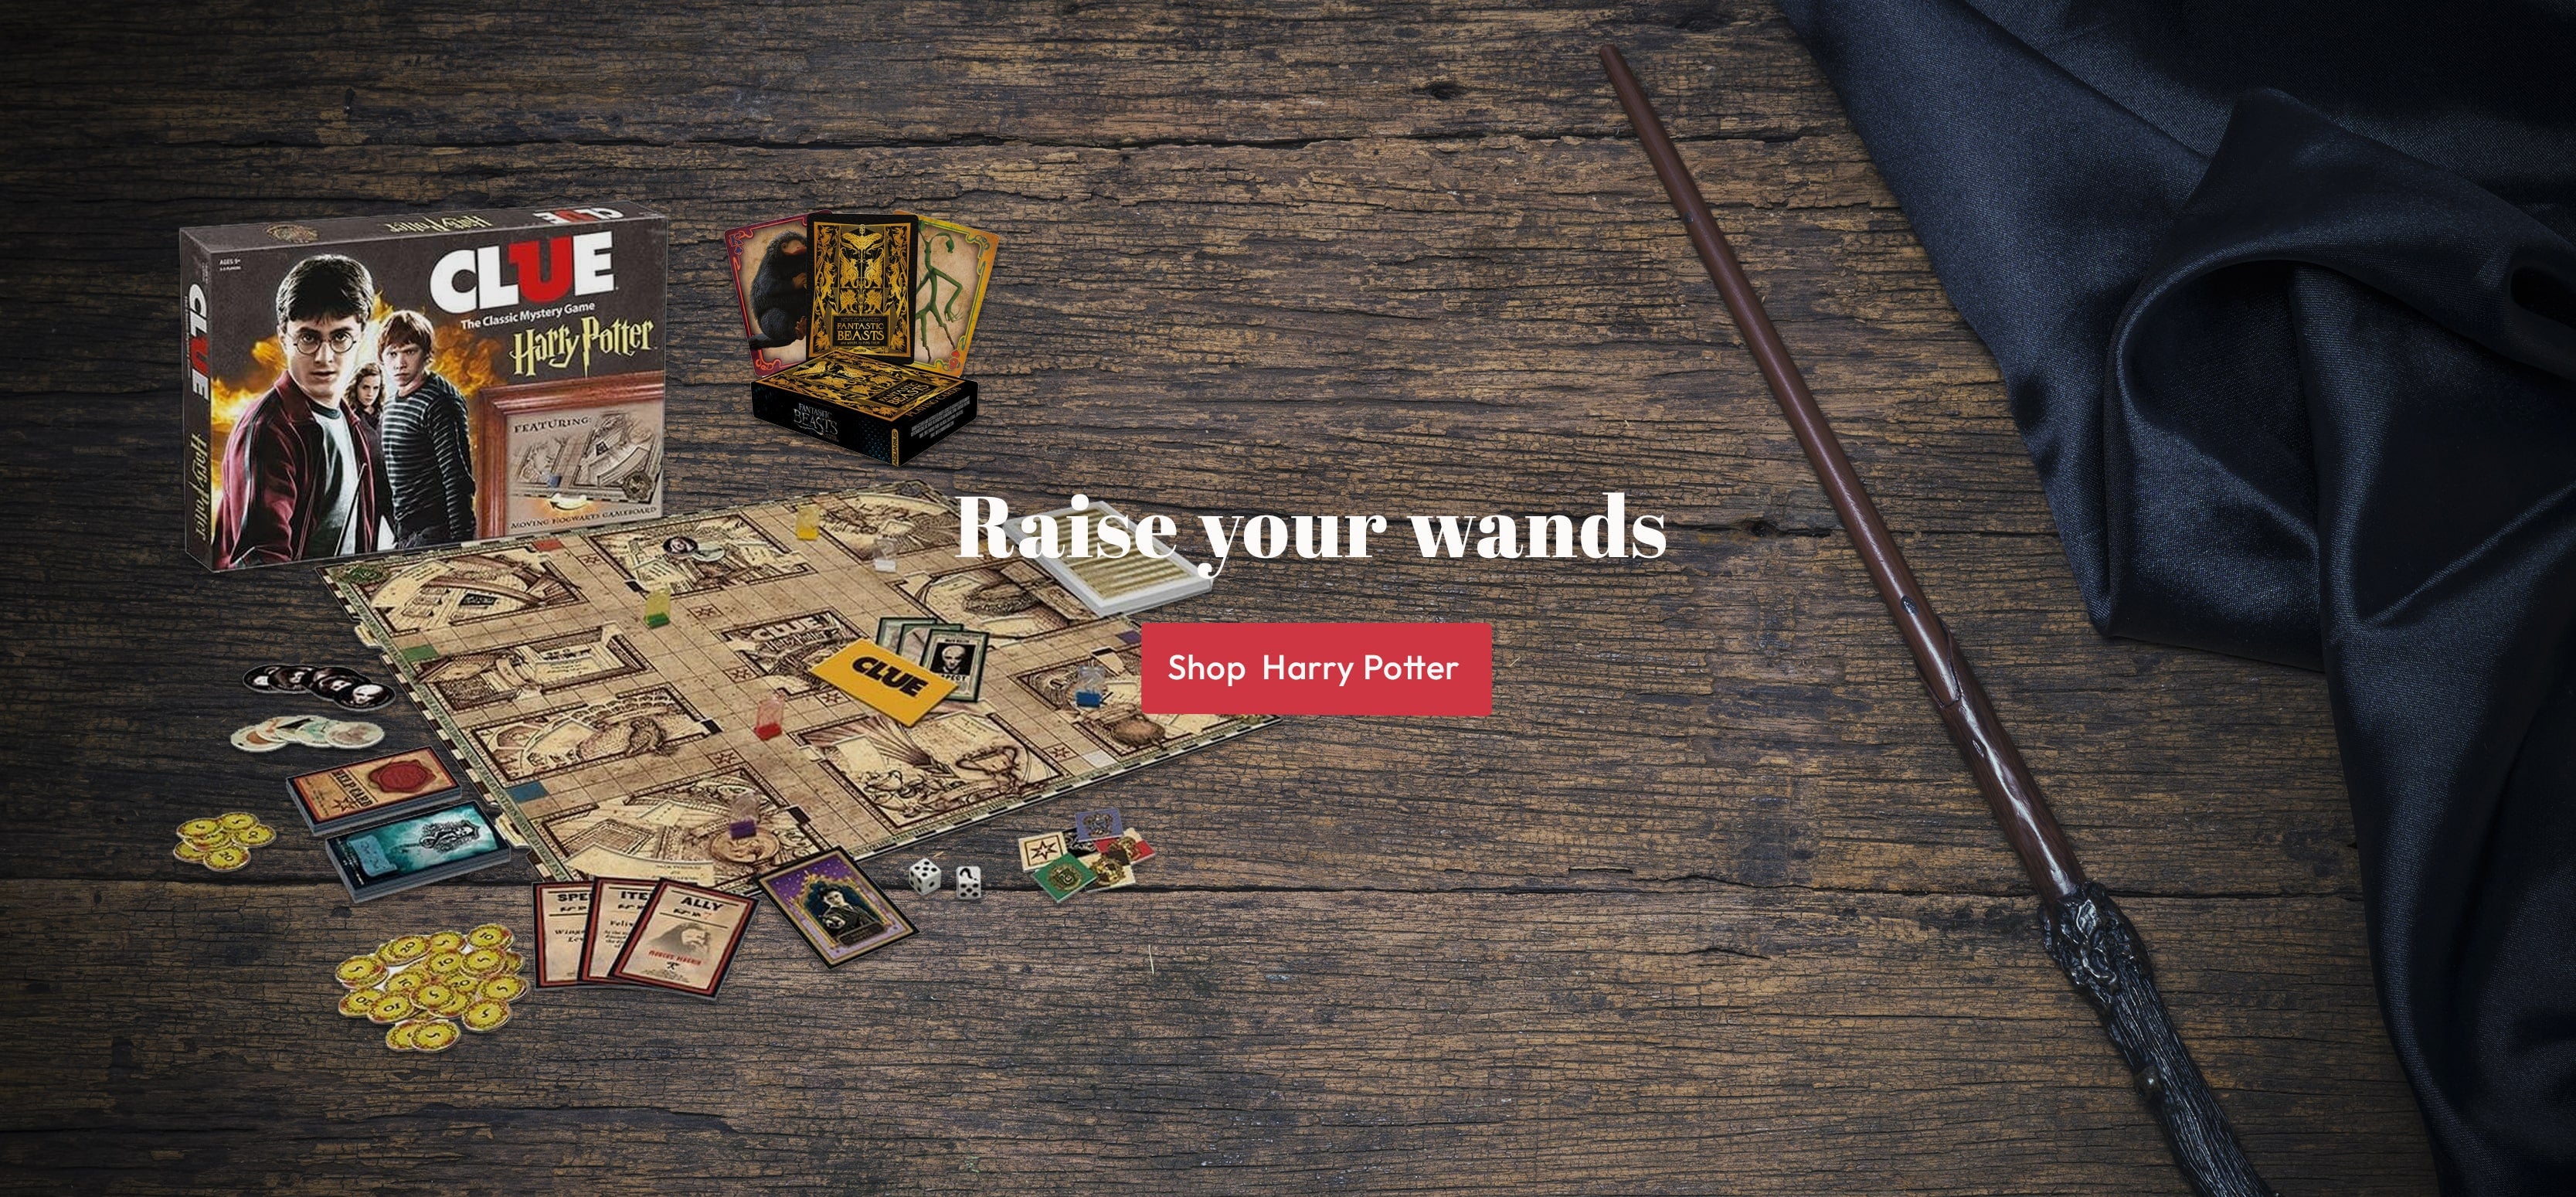 Raise your wands to Harry Potter day. Shop wizard worthy games at Calendar Club.